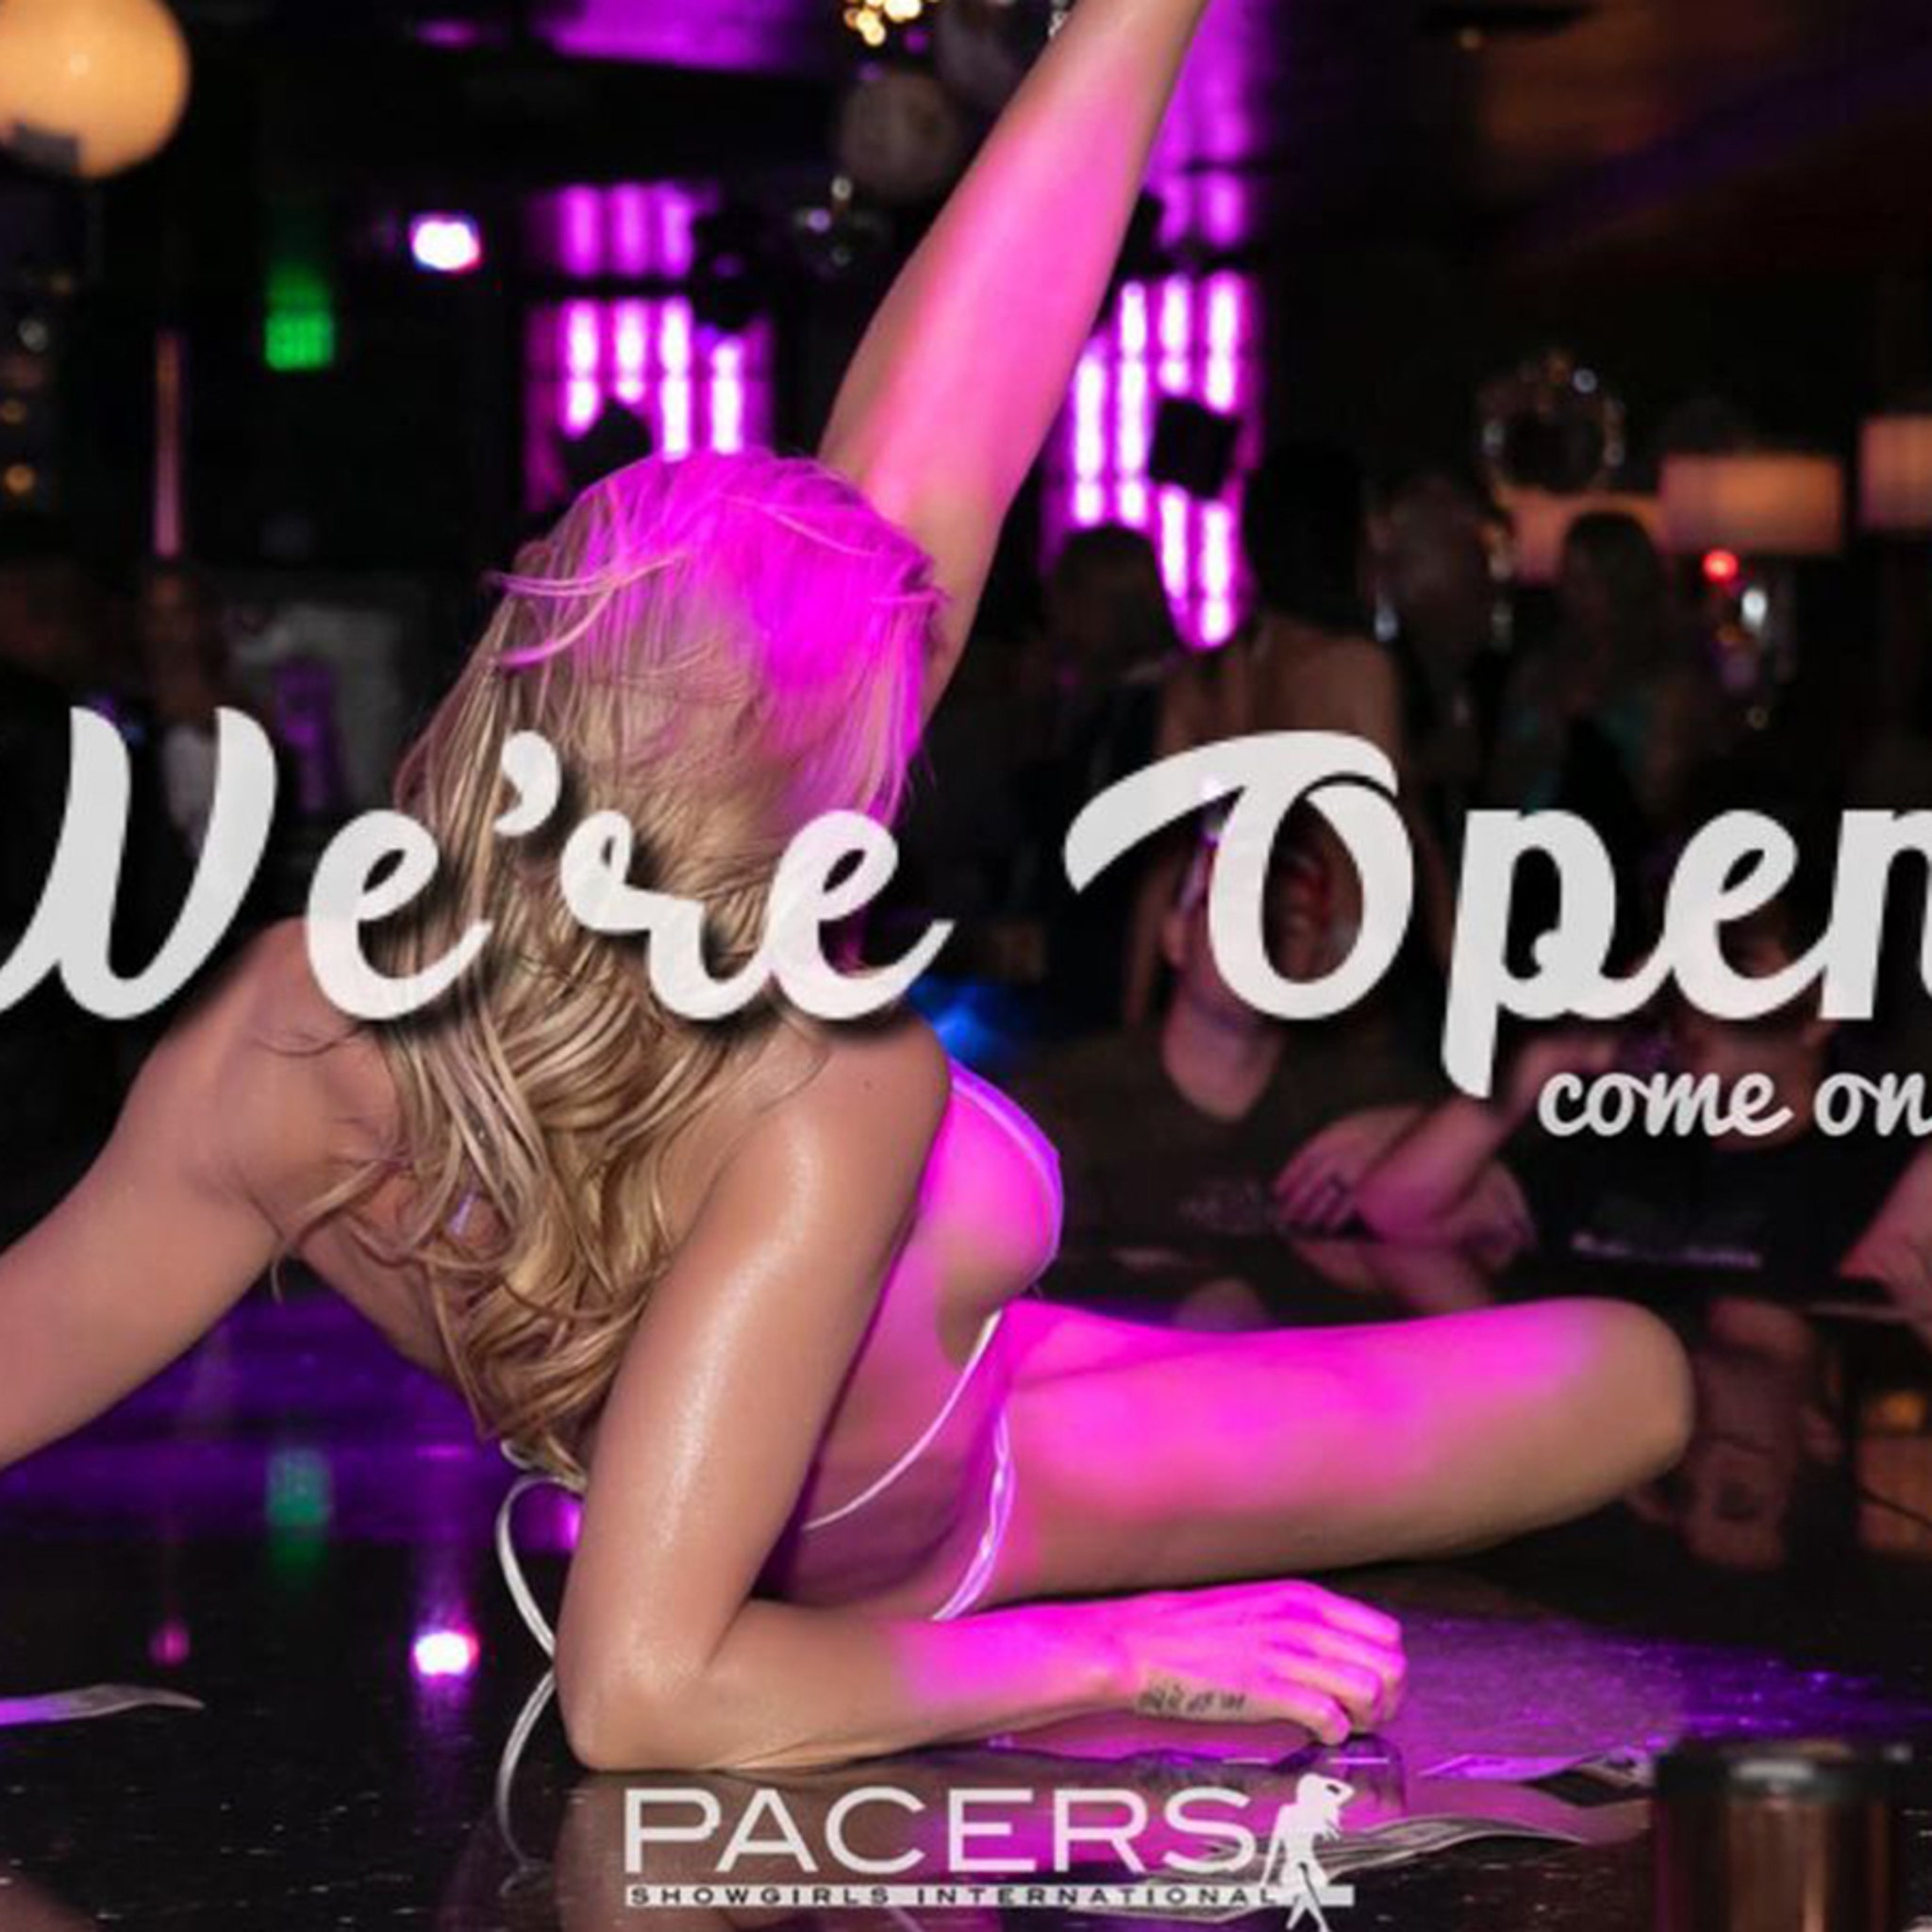 San Diego Strip Clubs That Remain Open Threatened with Legal Action